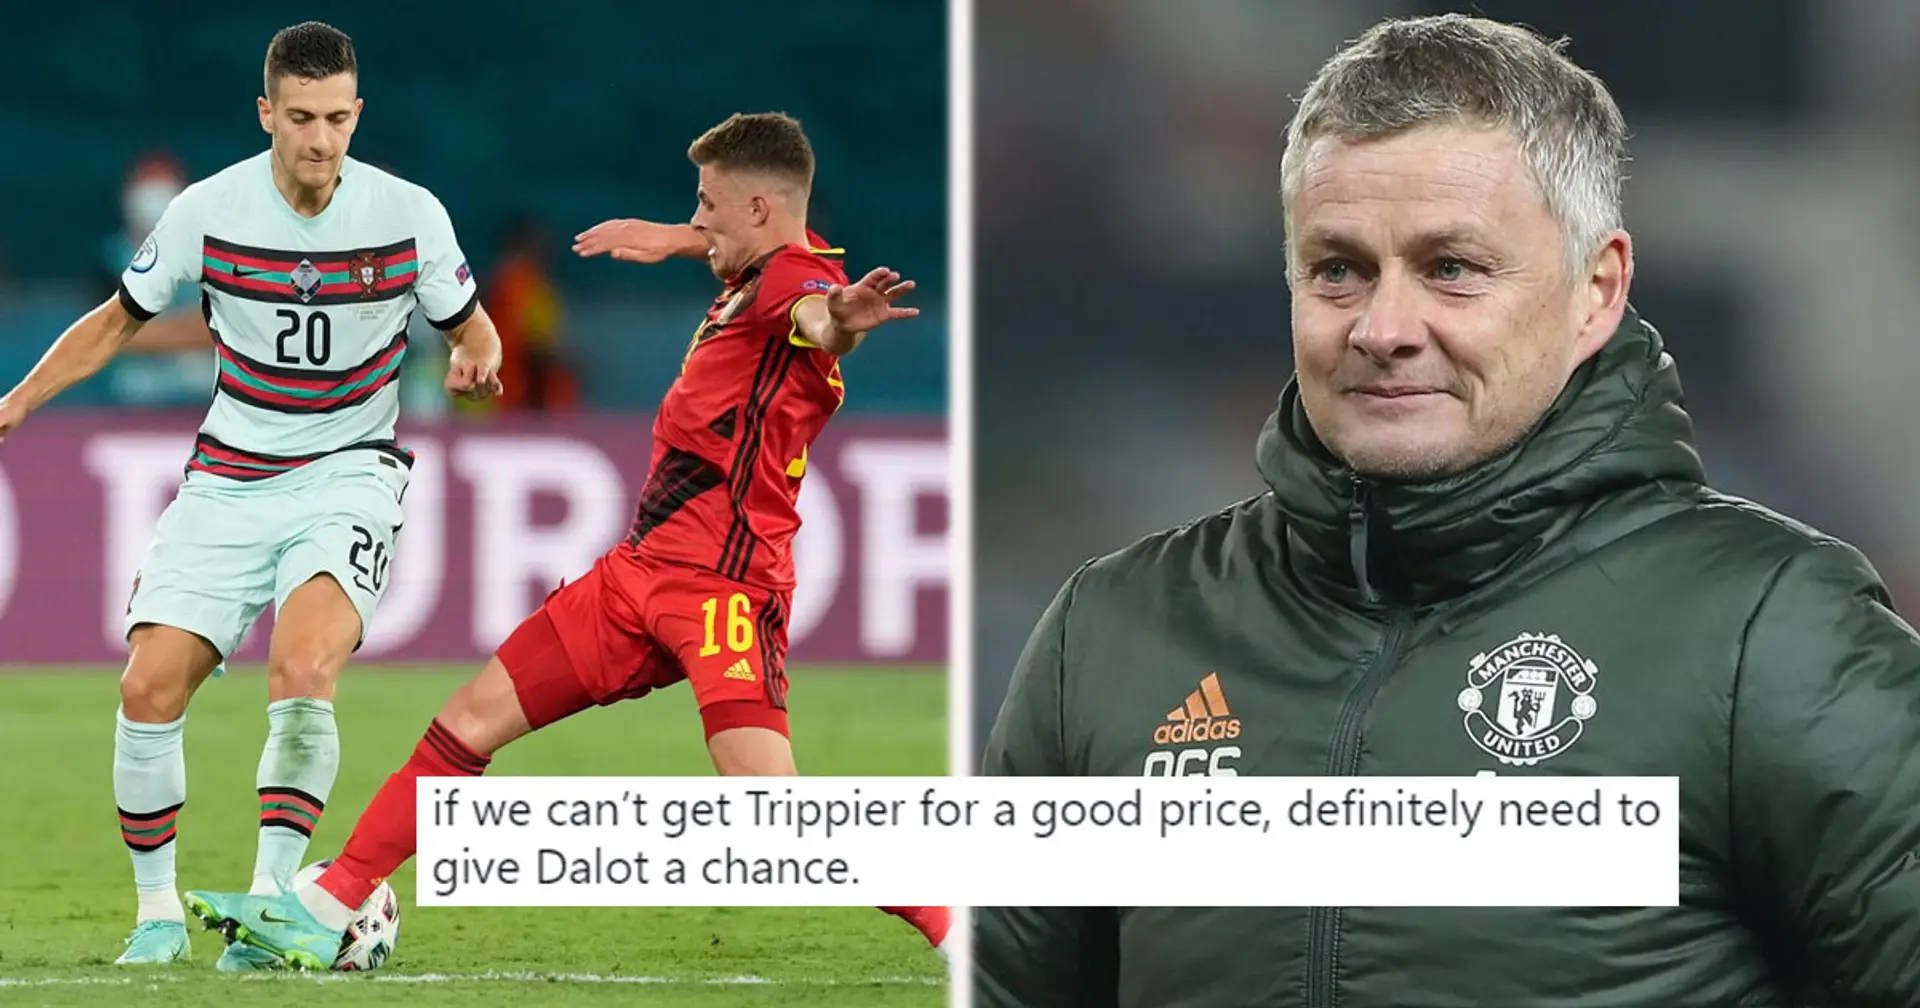 AC Milan wants to complete Dalot return next week - but United fans want him to stay after Portugal heroics